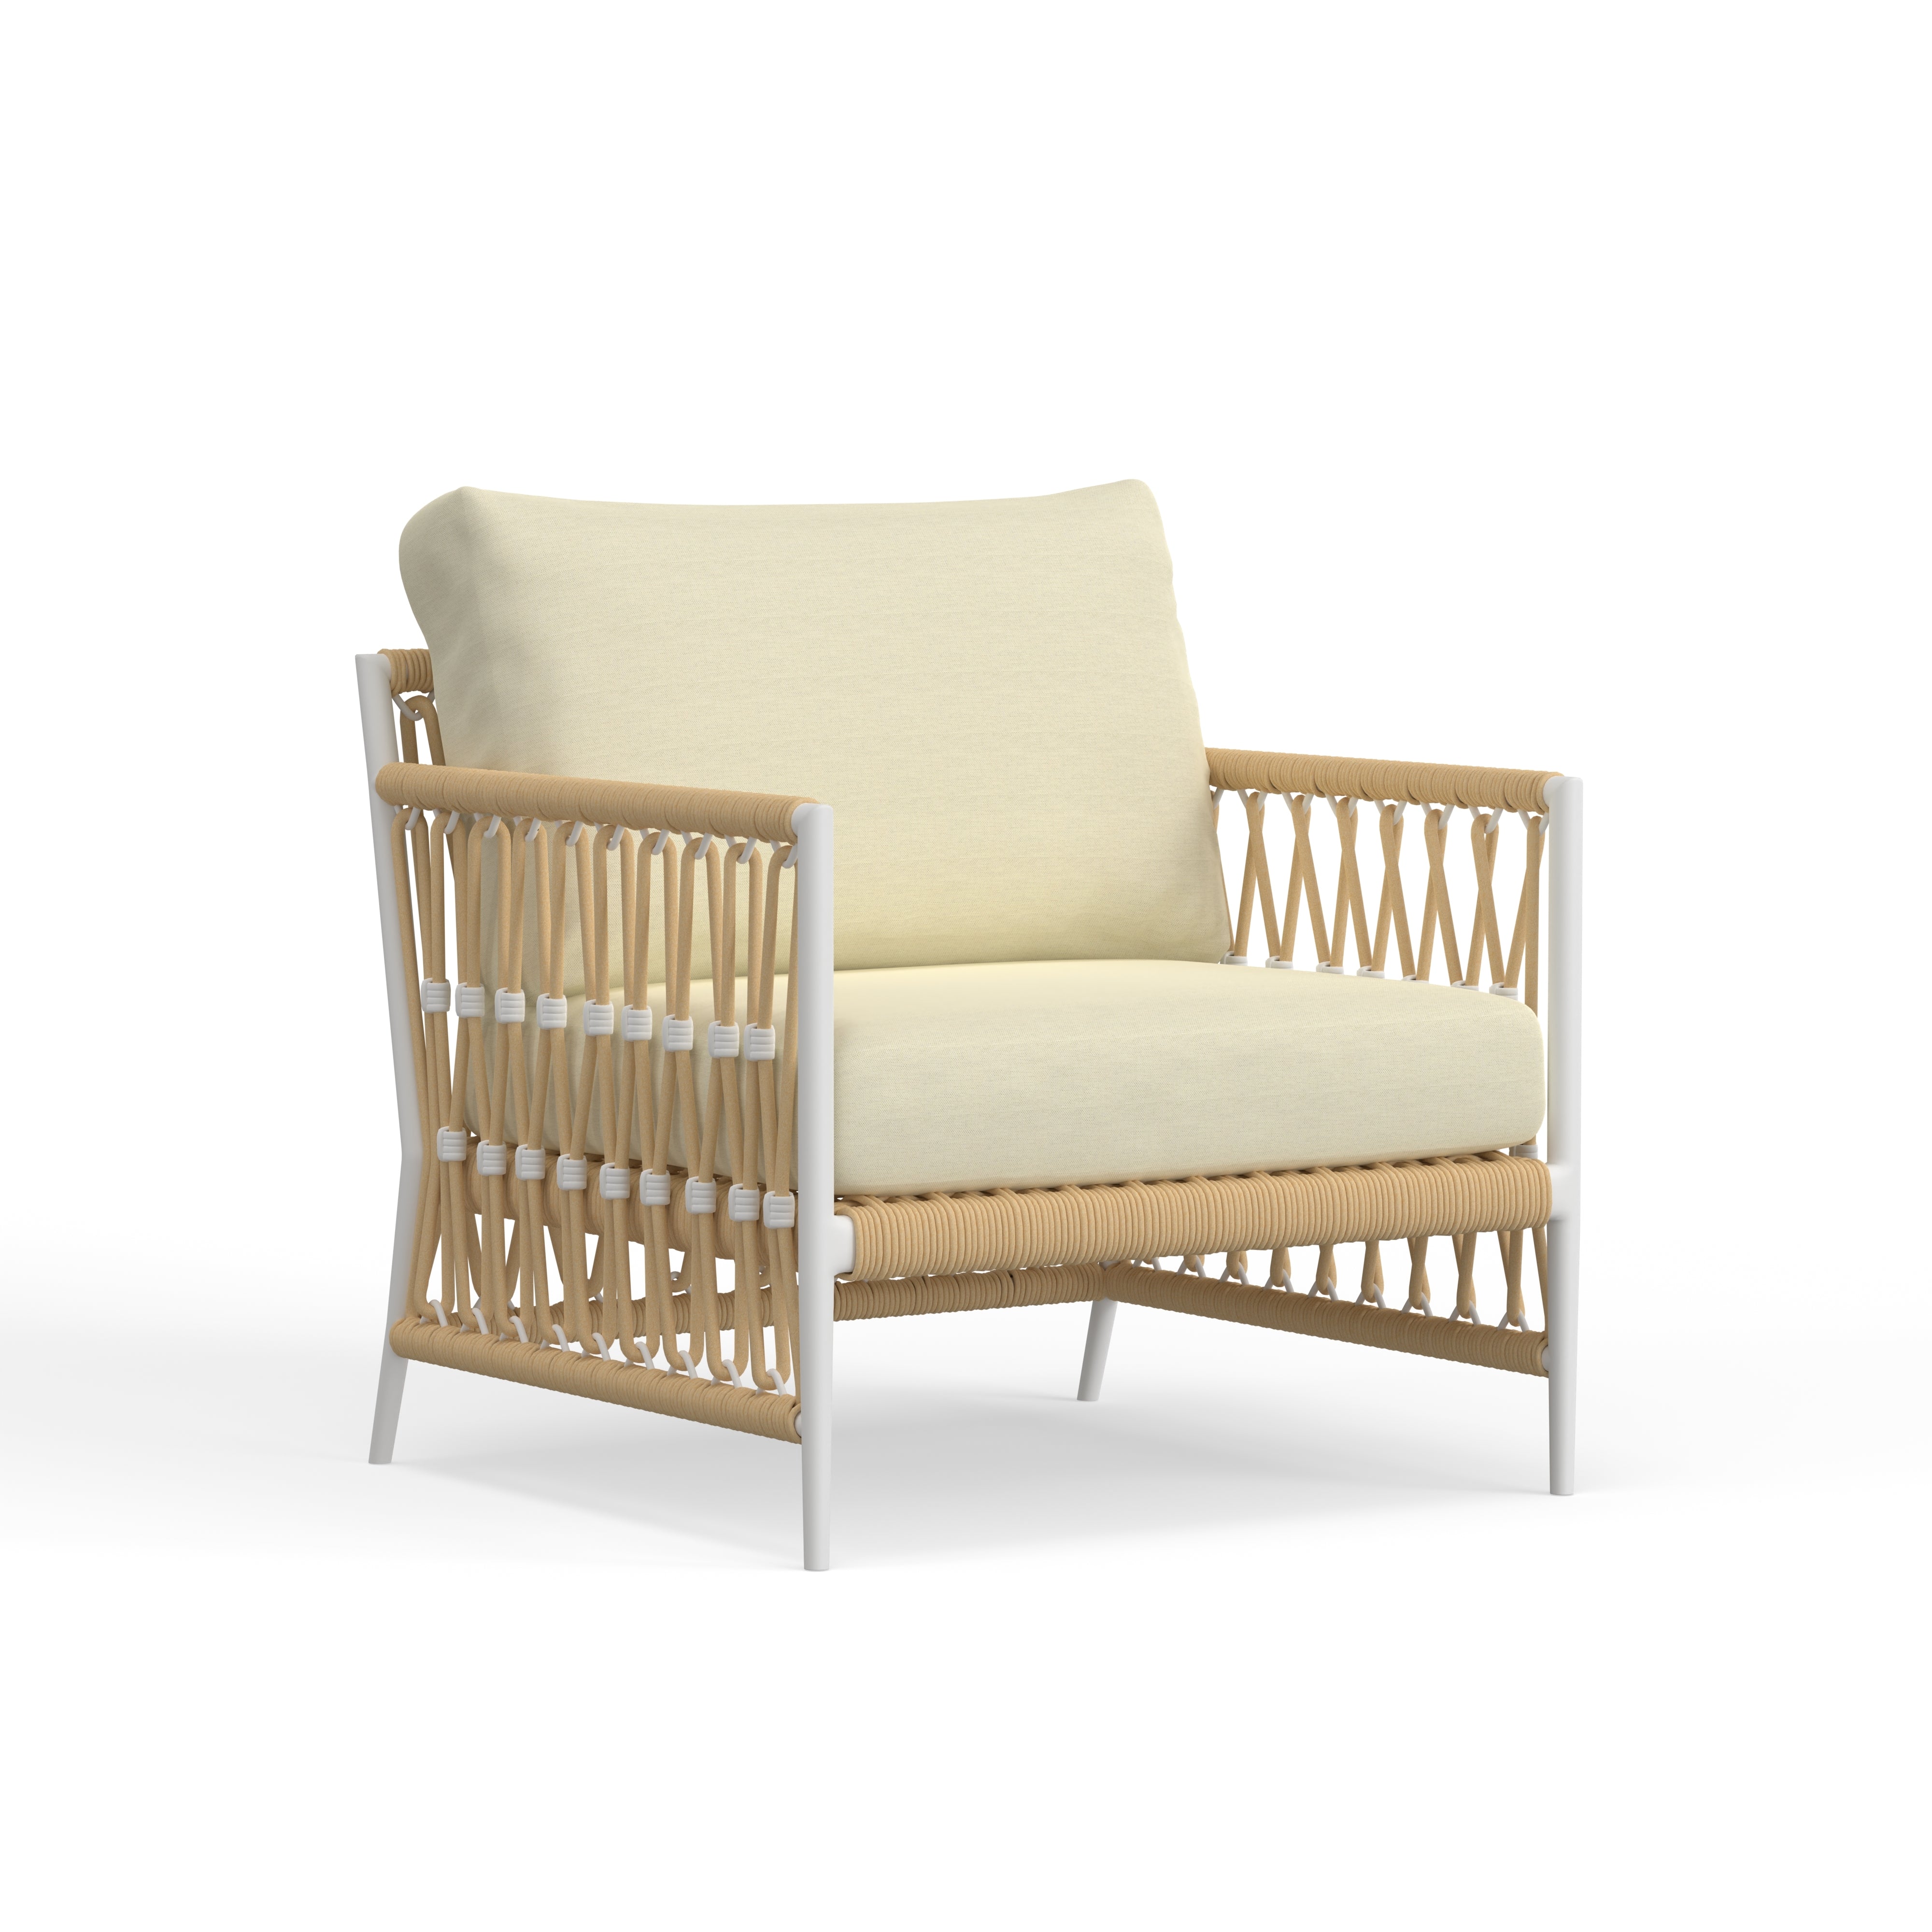 Best Quality Outdoor Aluminum Chair In White